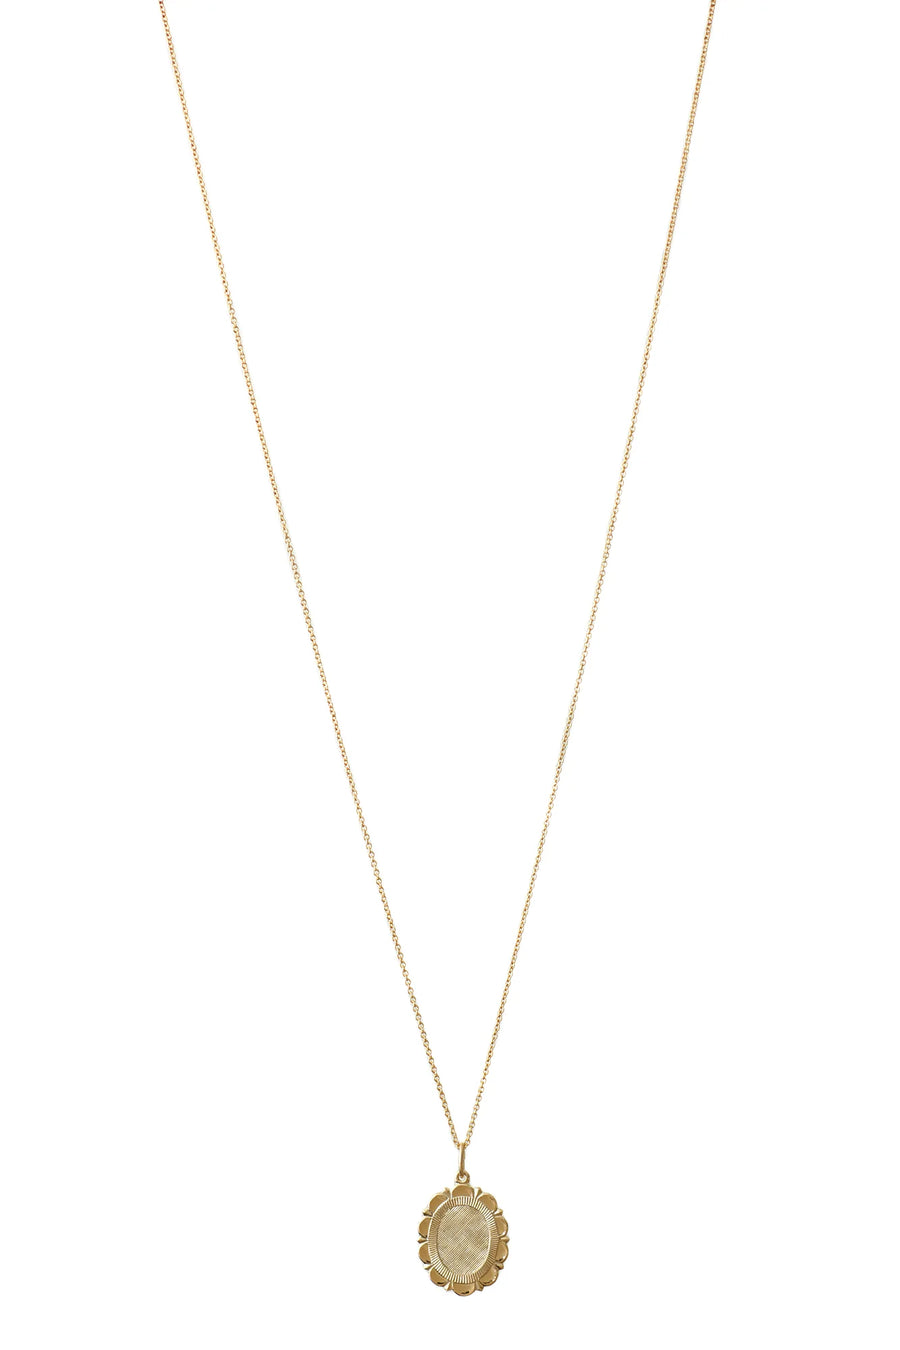 LISBETH JEWELRY - COLLIER JUNE - OR REMPLI